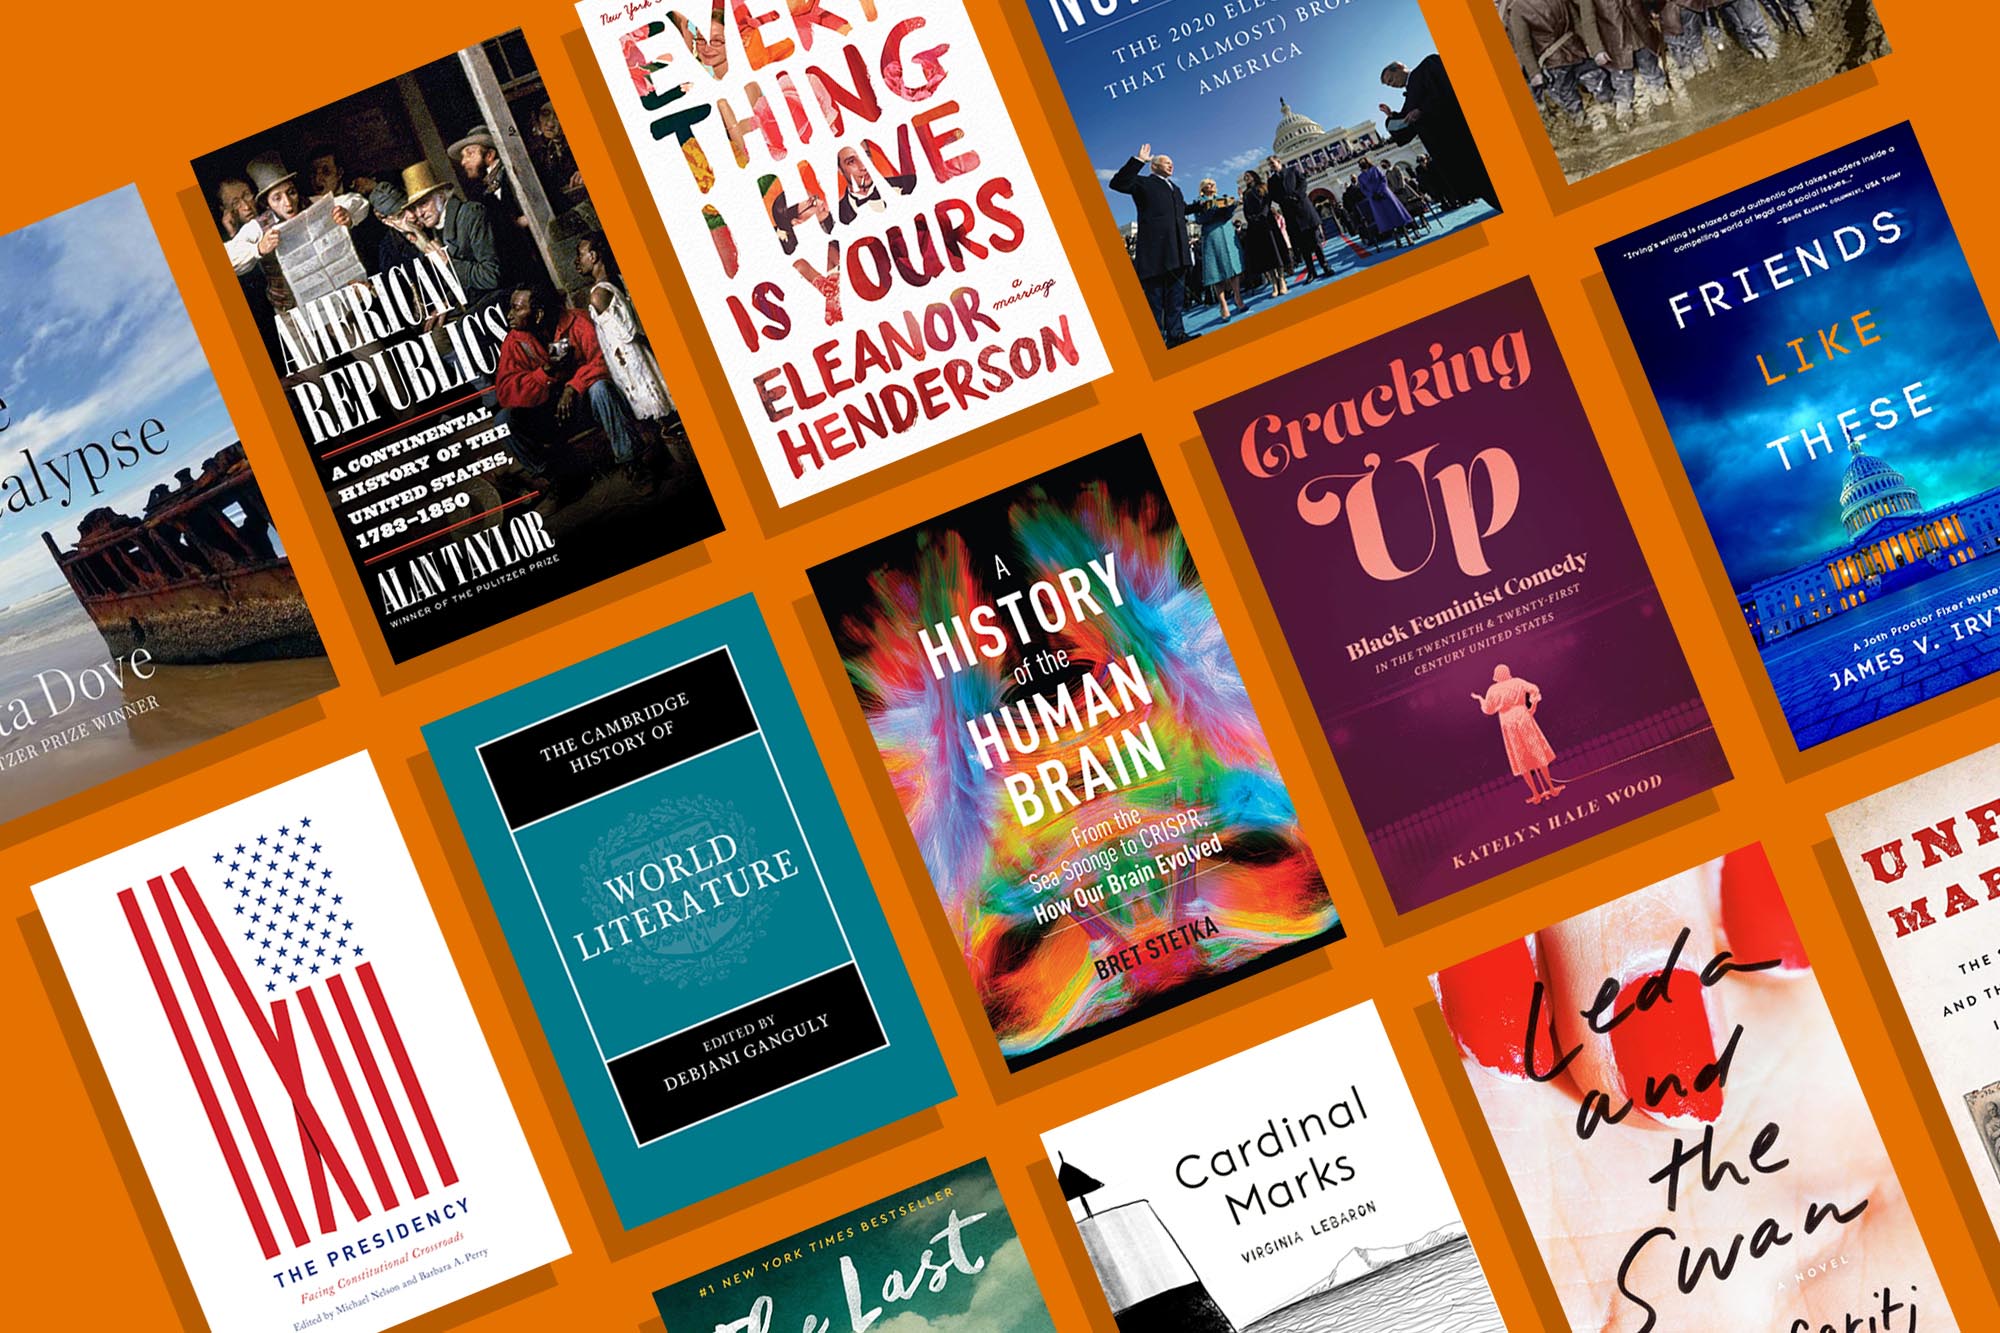 16 New Books by UVA Authors to Consider Reading This Summer